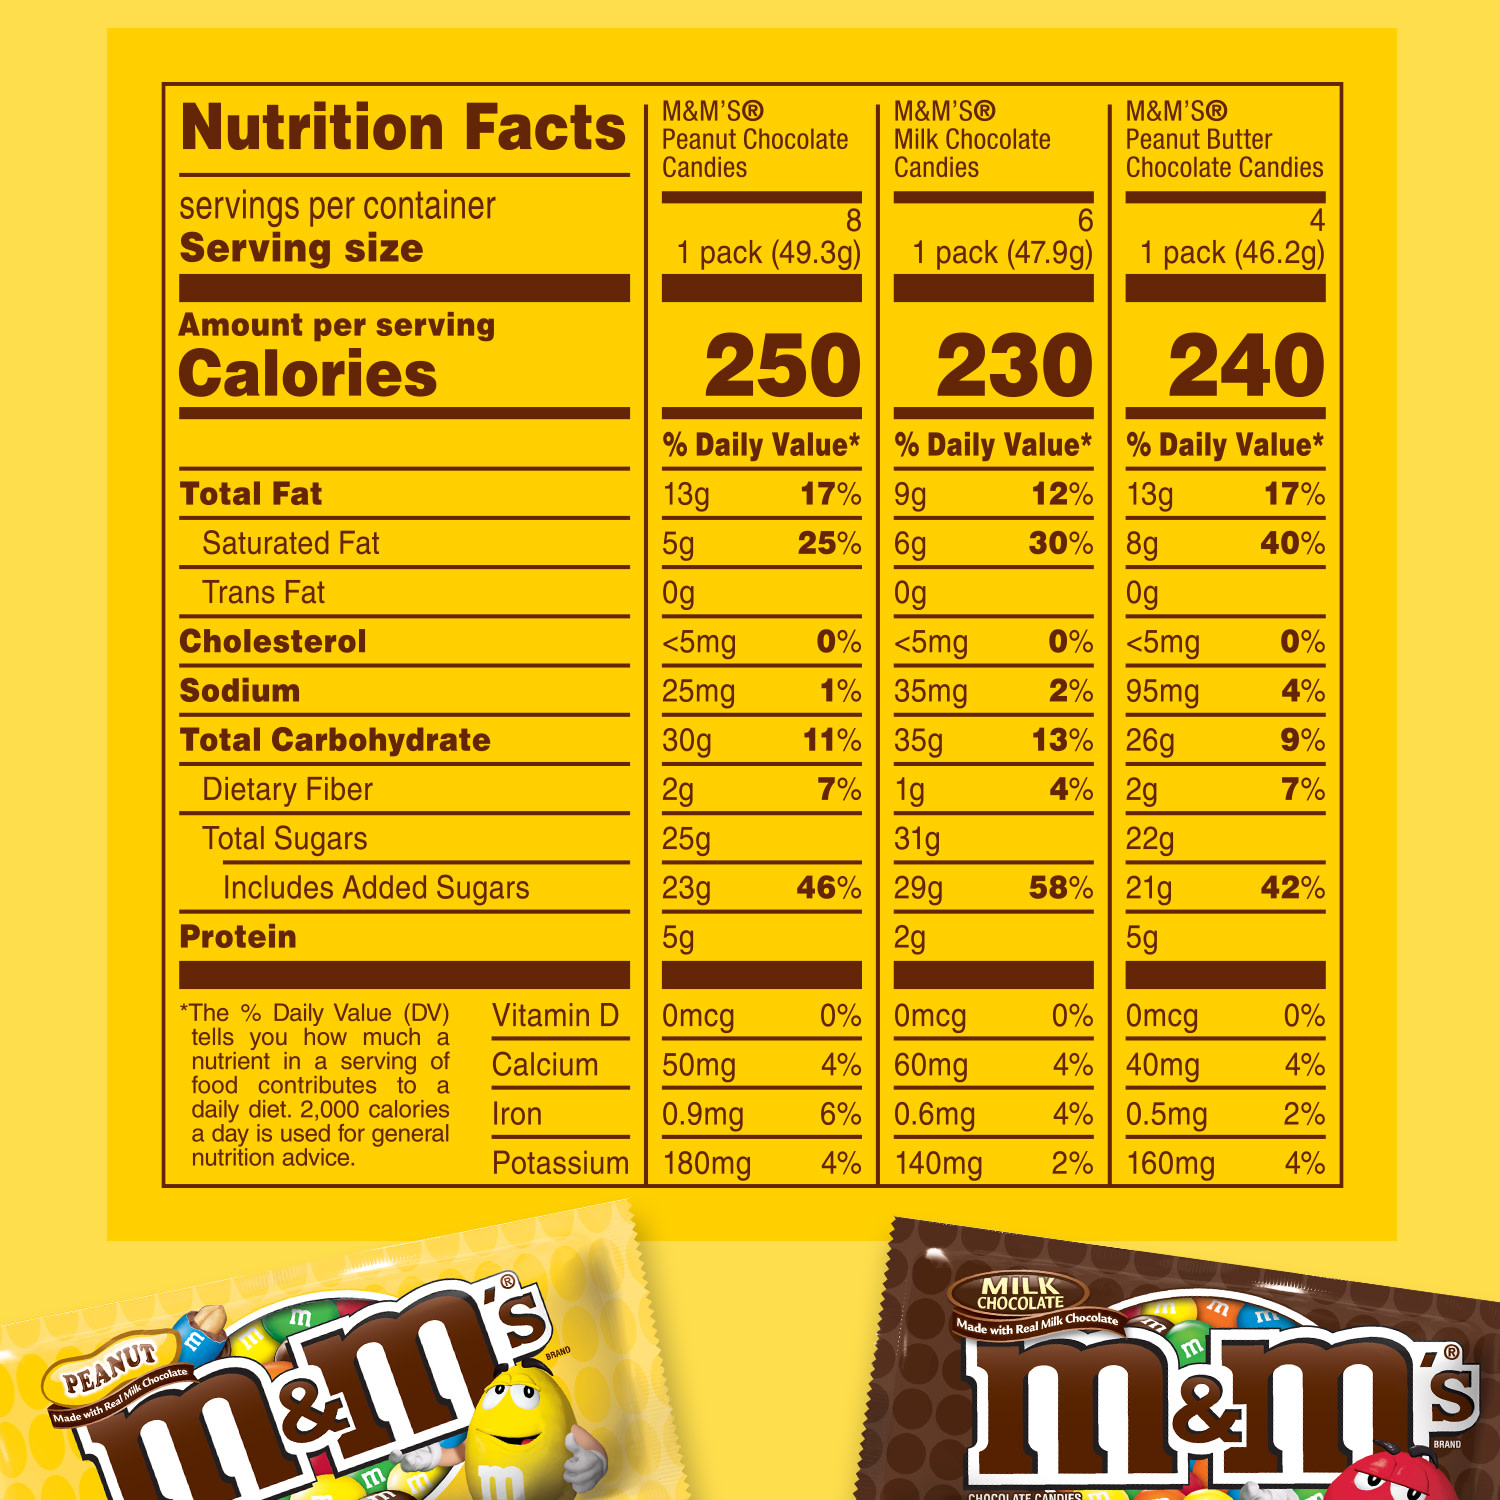 M&M's Variety Pack Full Size Milk Chocolate Candy Bars - 18 Ct - image 7 of 14